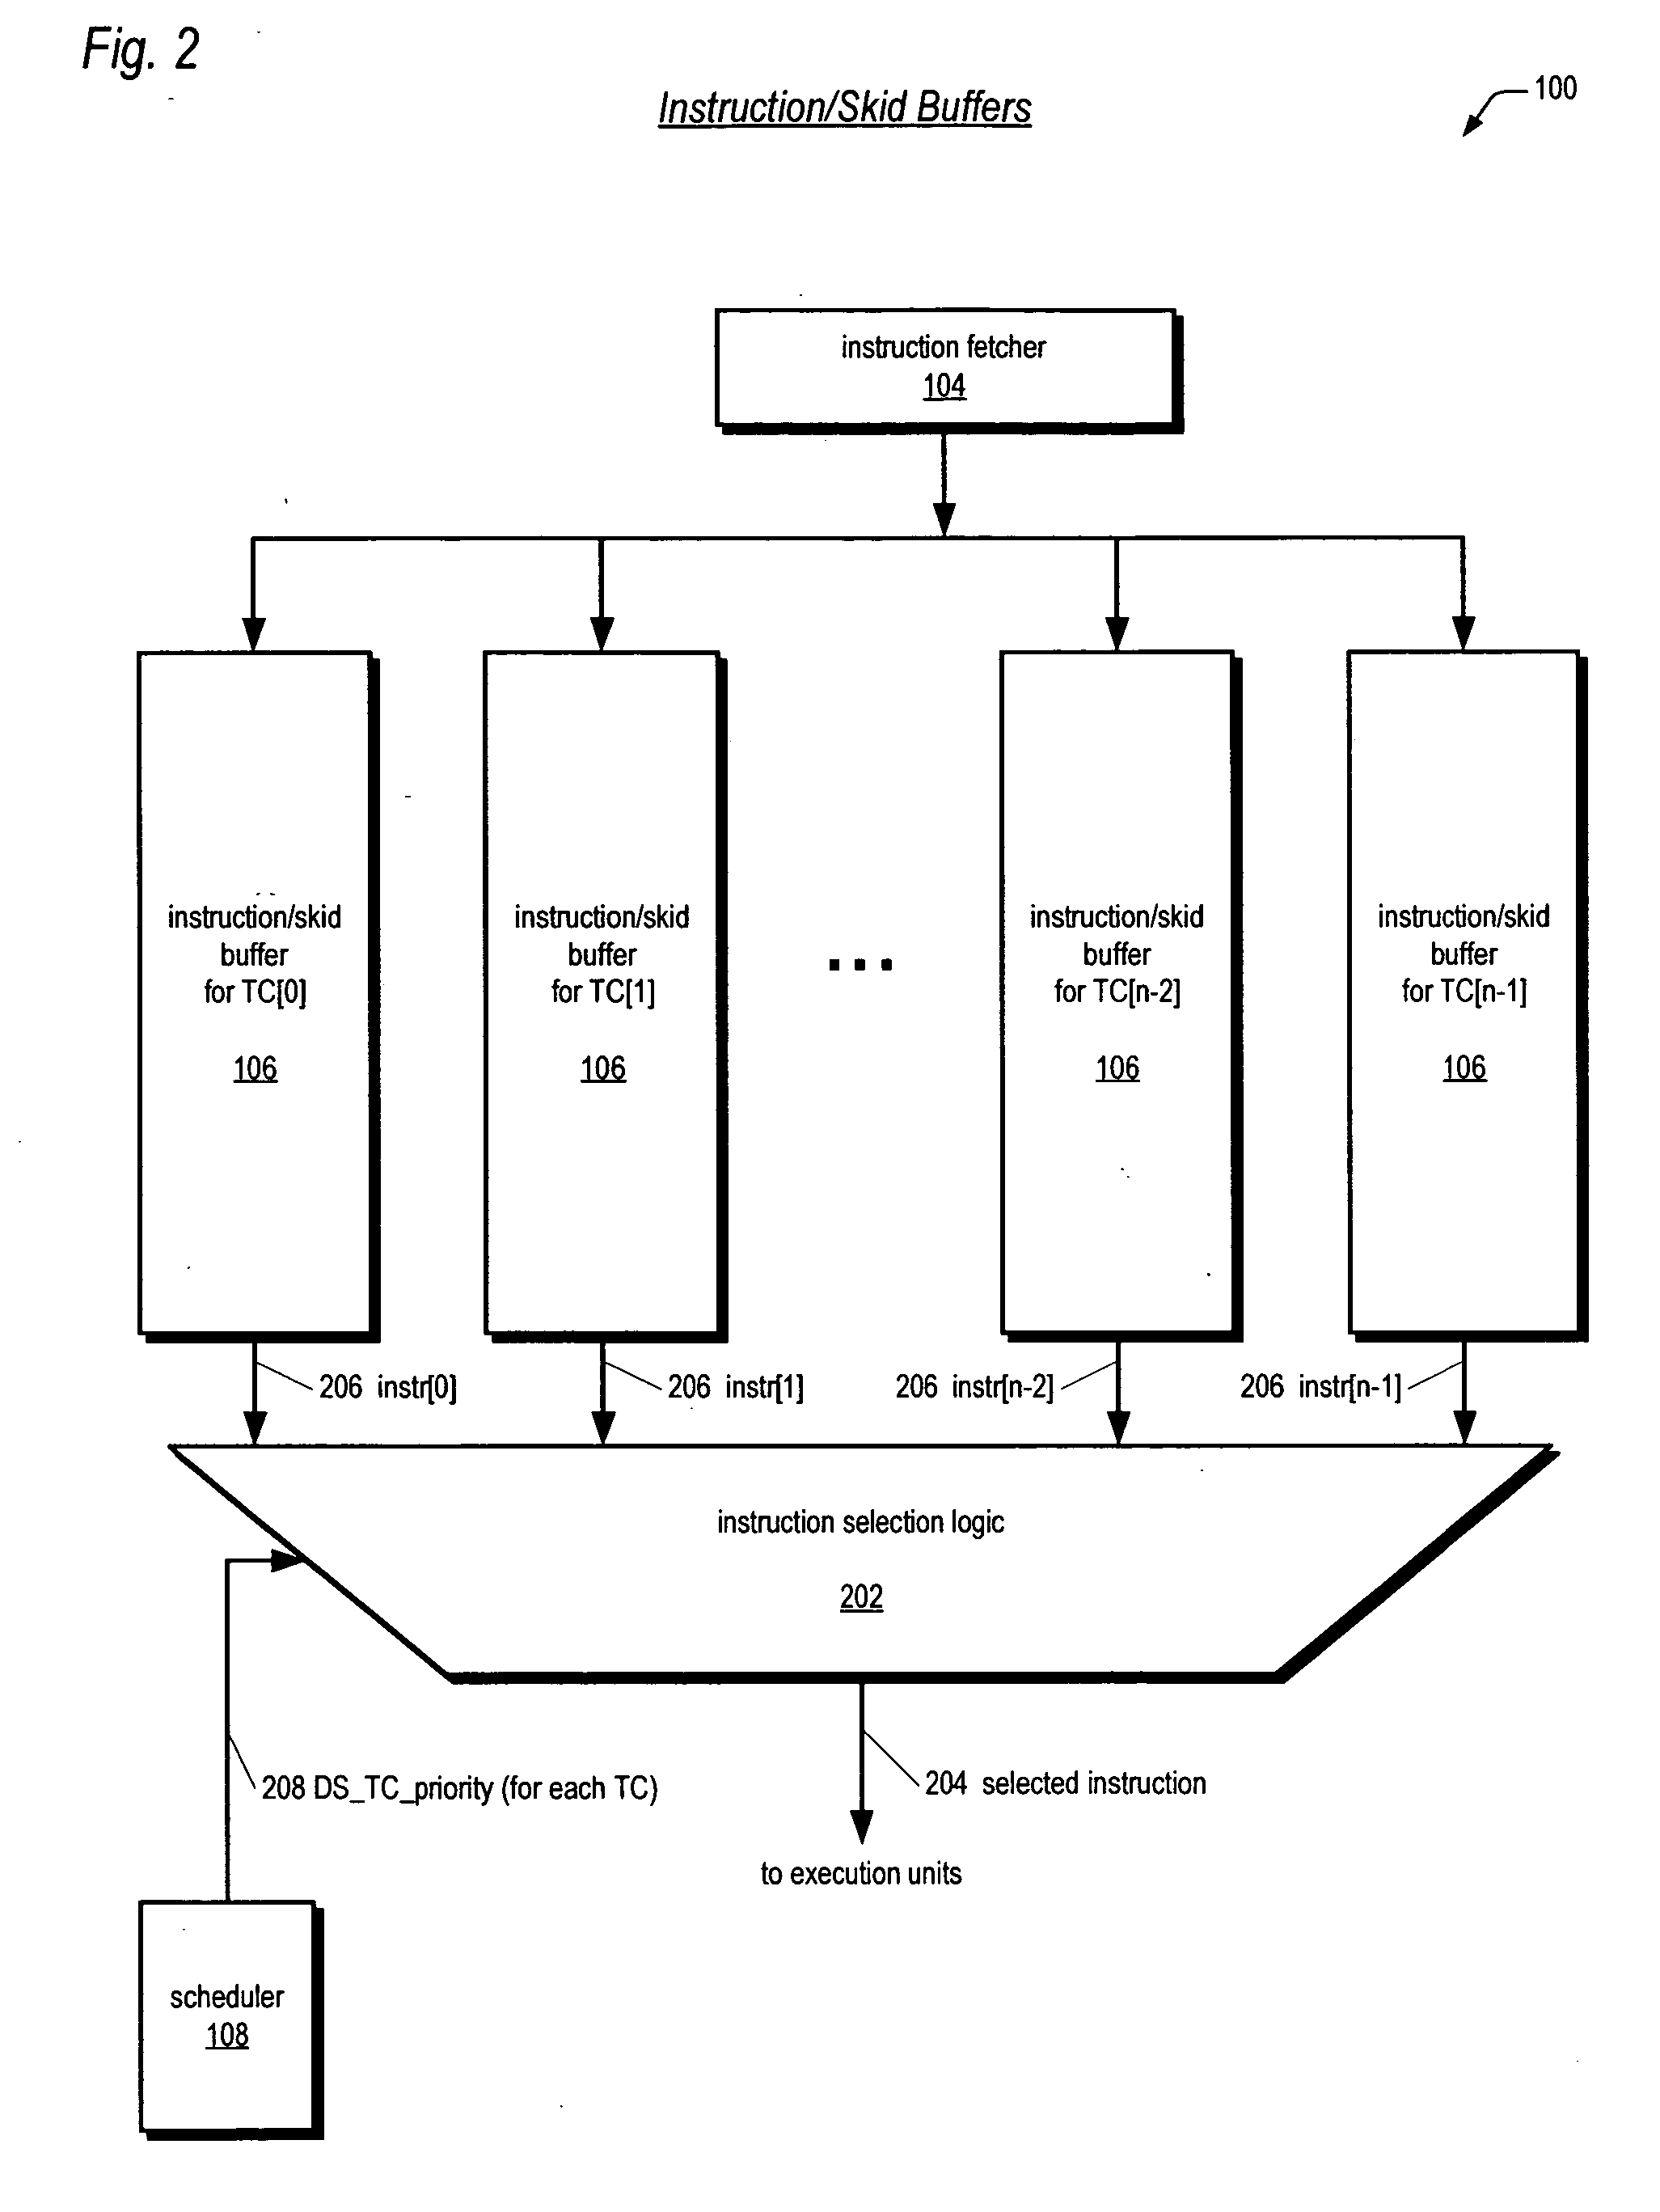 Instruction dispatch scheduler employing round-robin apparatus supporting multiple thread priorities for use in multithreading microprocessor